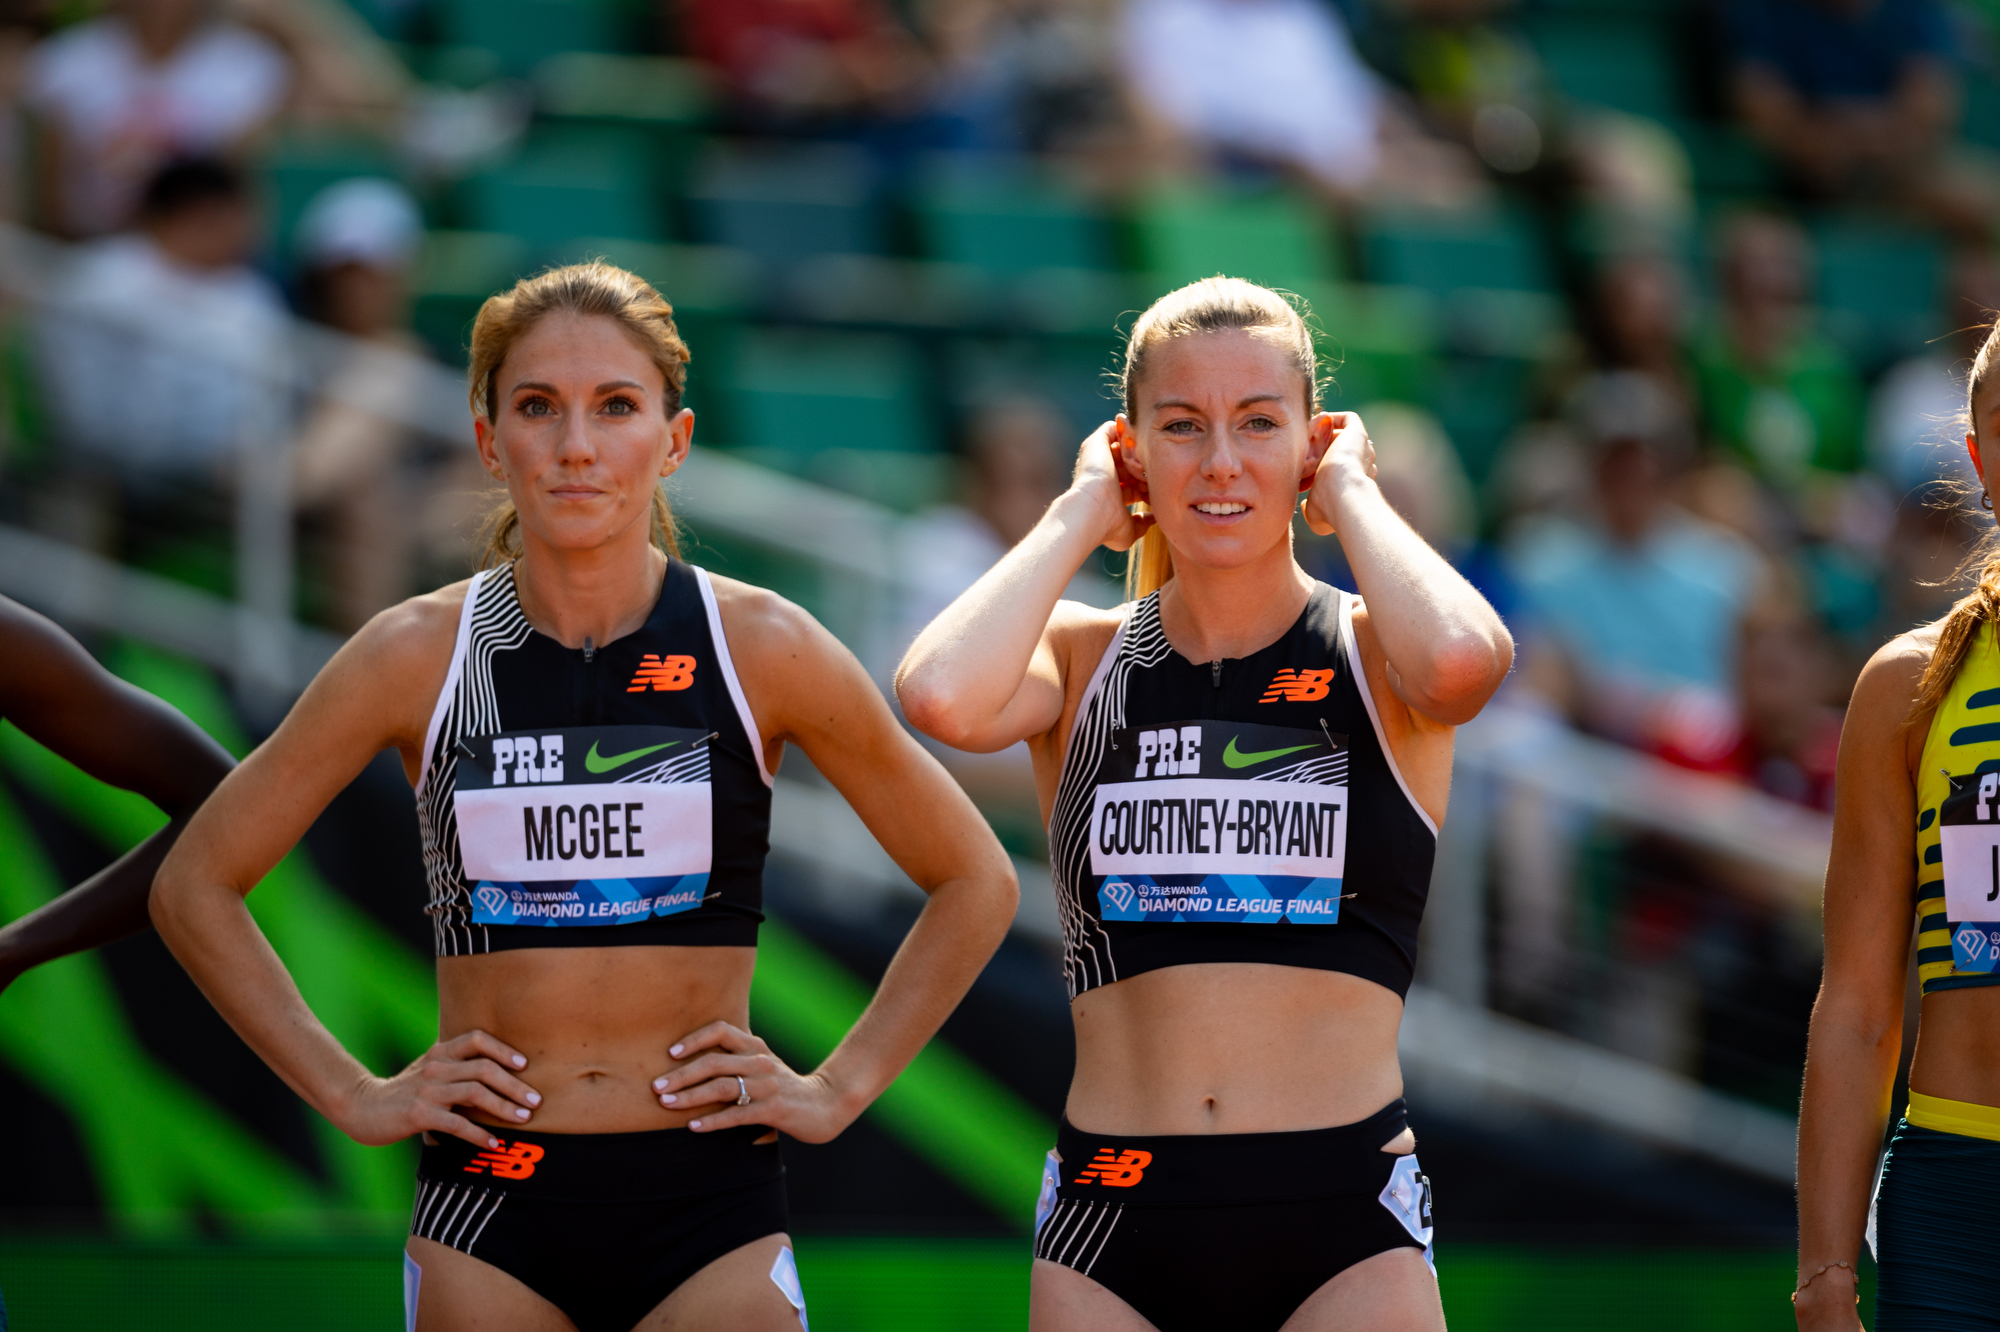 Cory Ann McGee (left) of the United States and Melissa Courtney-Bryant of Great Britain line up for the women’s 1,500 meters at the Prefontaine Classic track and field meet on Saturday, Sept. 16, 2023, at Hayward Field in Eugene.